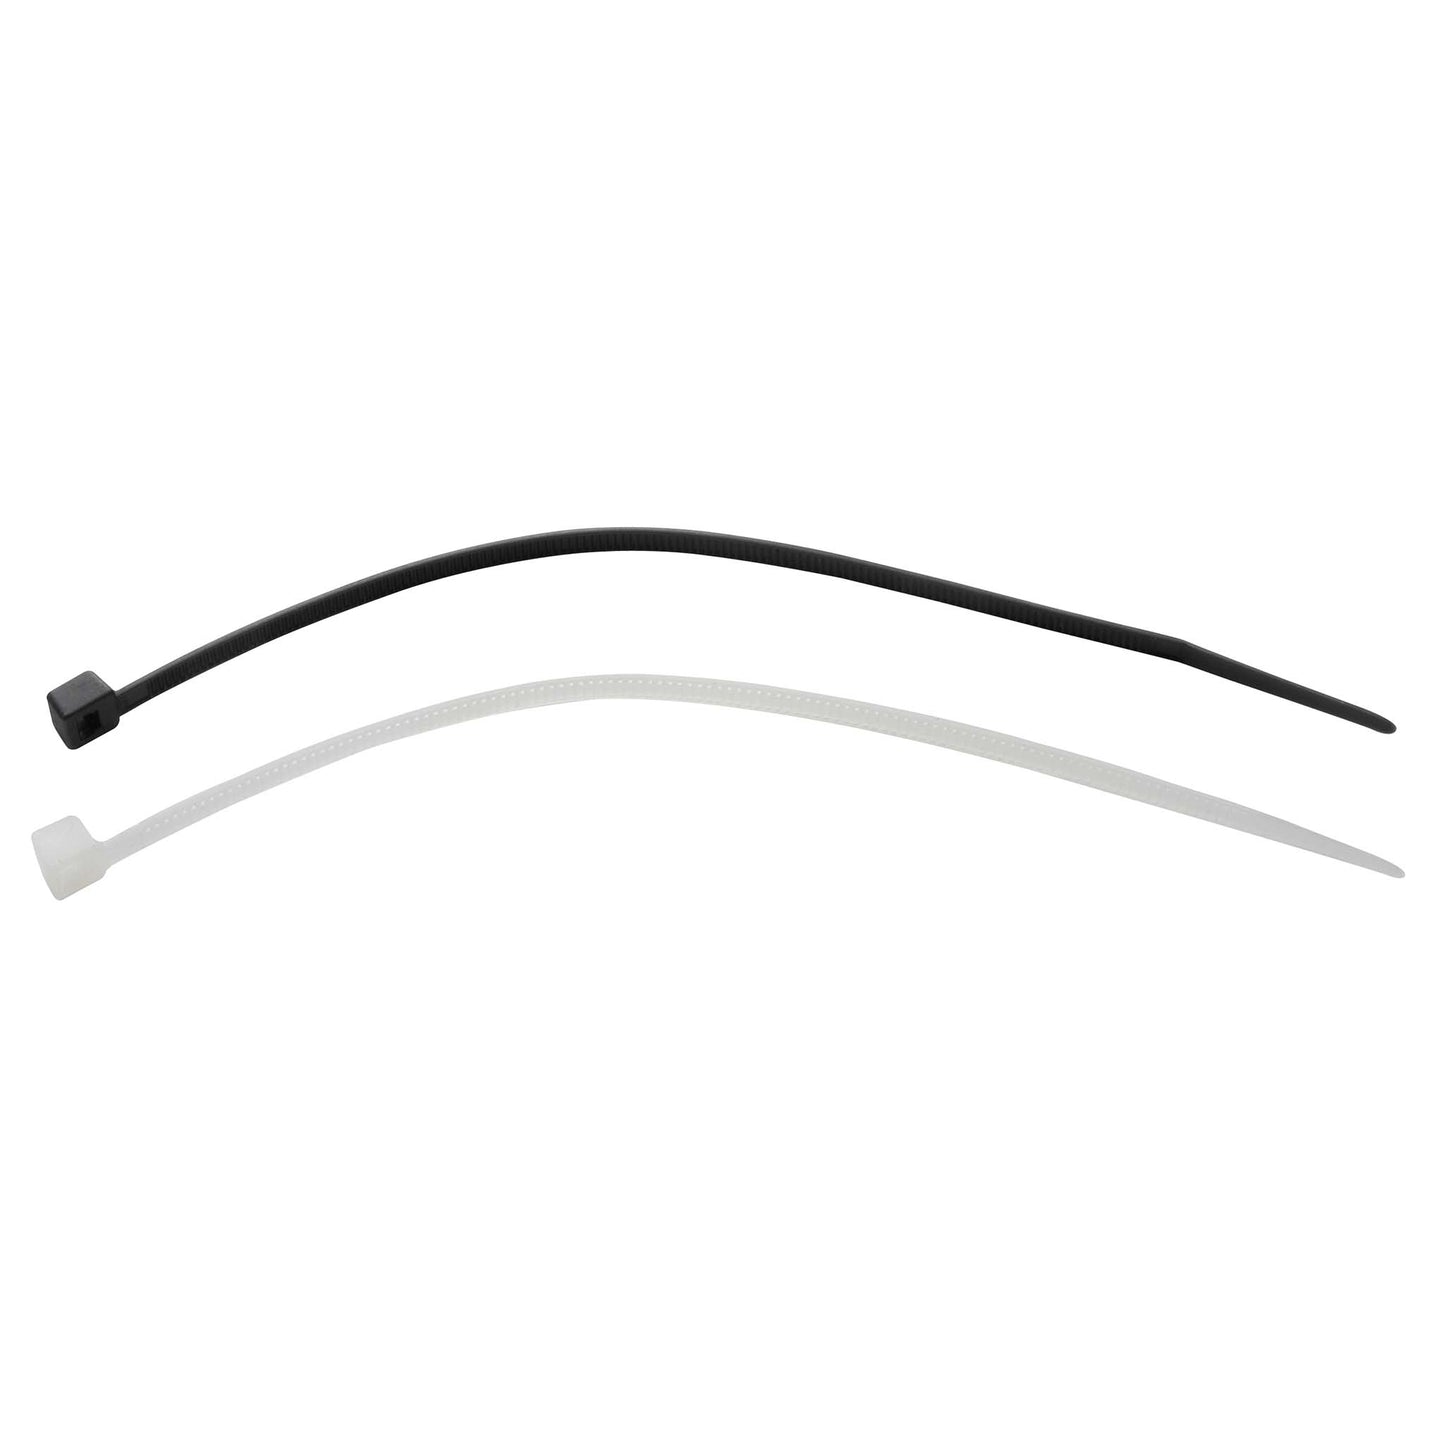 Cable ties 365 x 7.8 mm - transparent